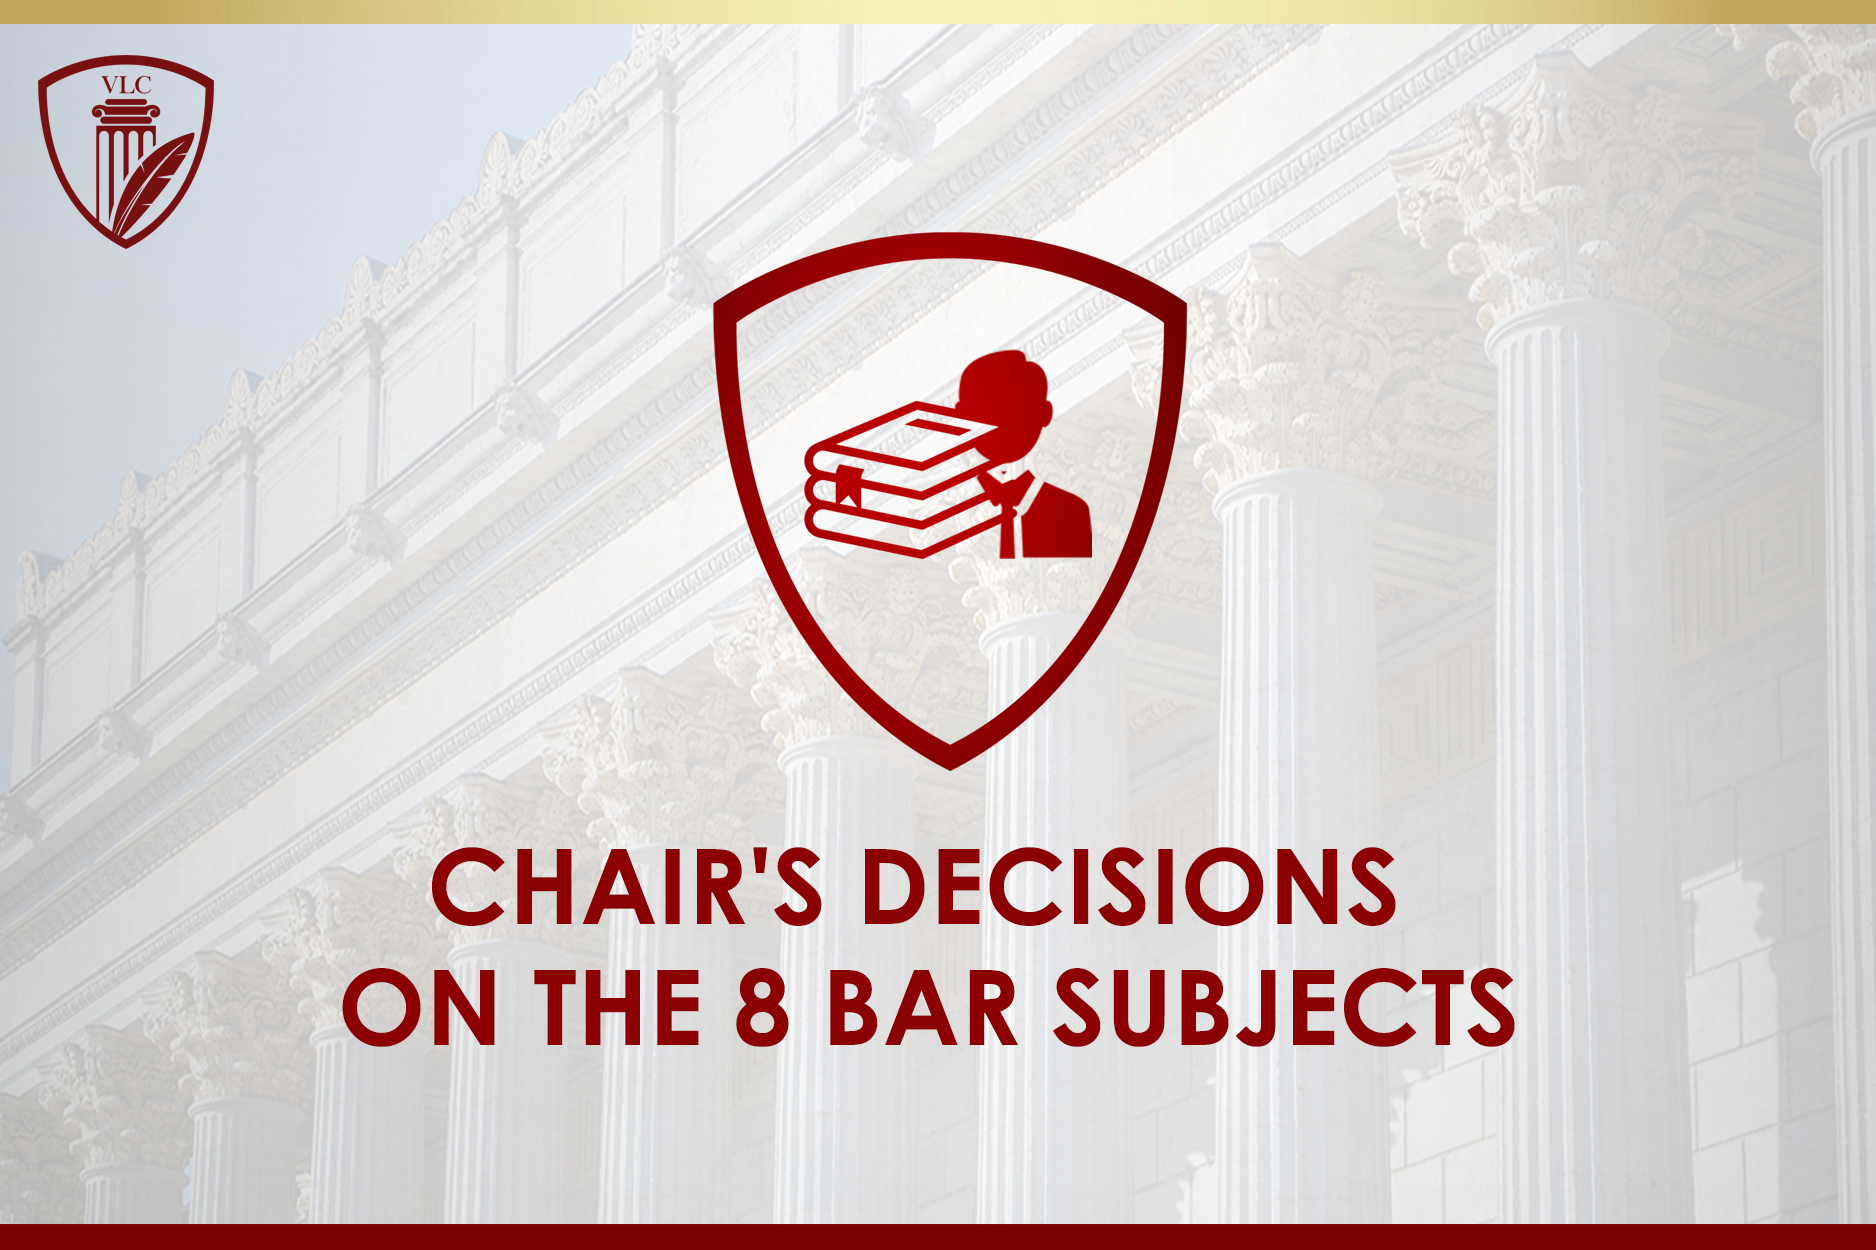 Chair's Decisions on the 8 Bar Subjects